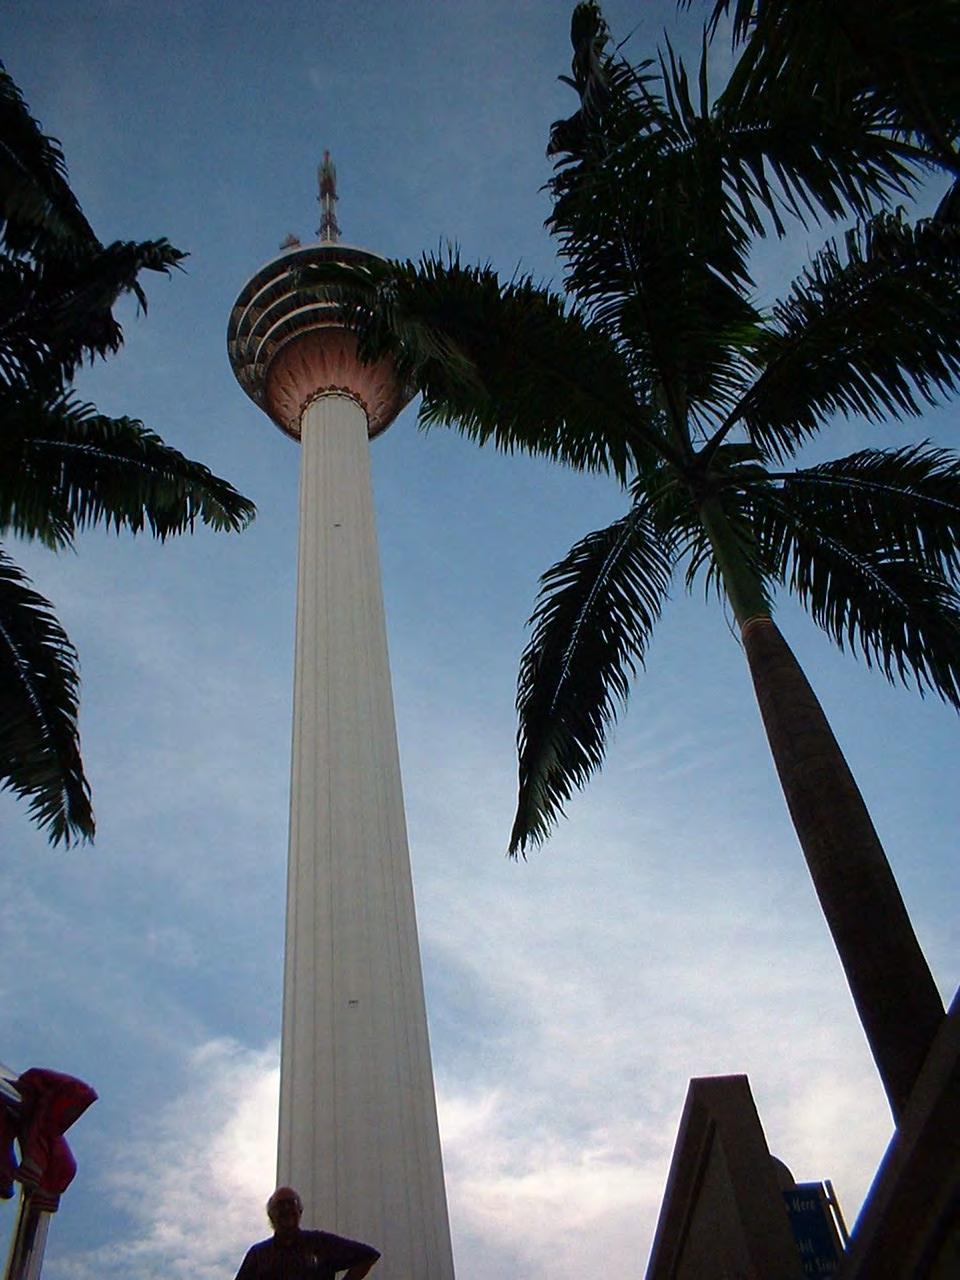 KL Tower, tallest concrete tower in the world, 4 th tallest